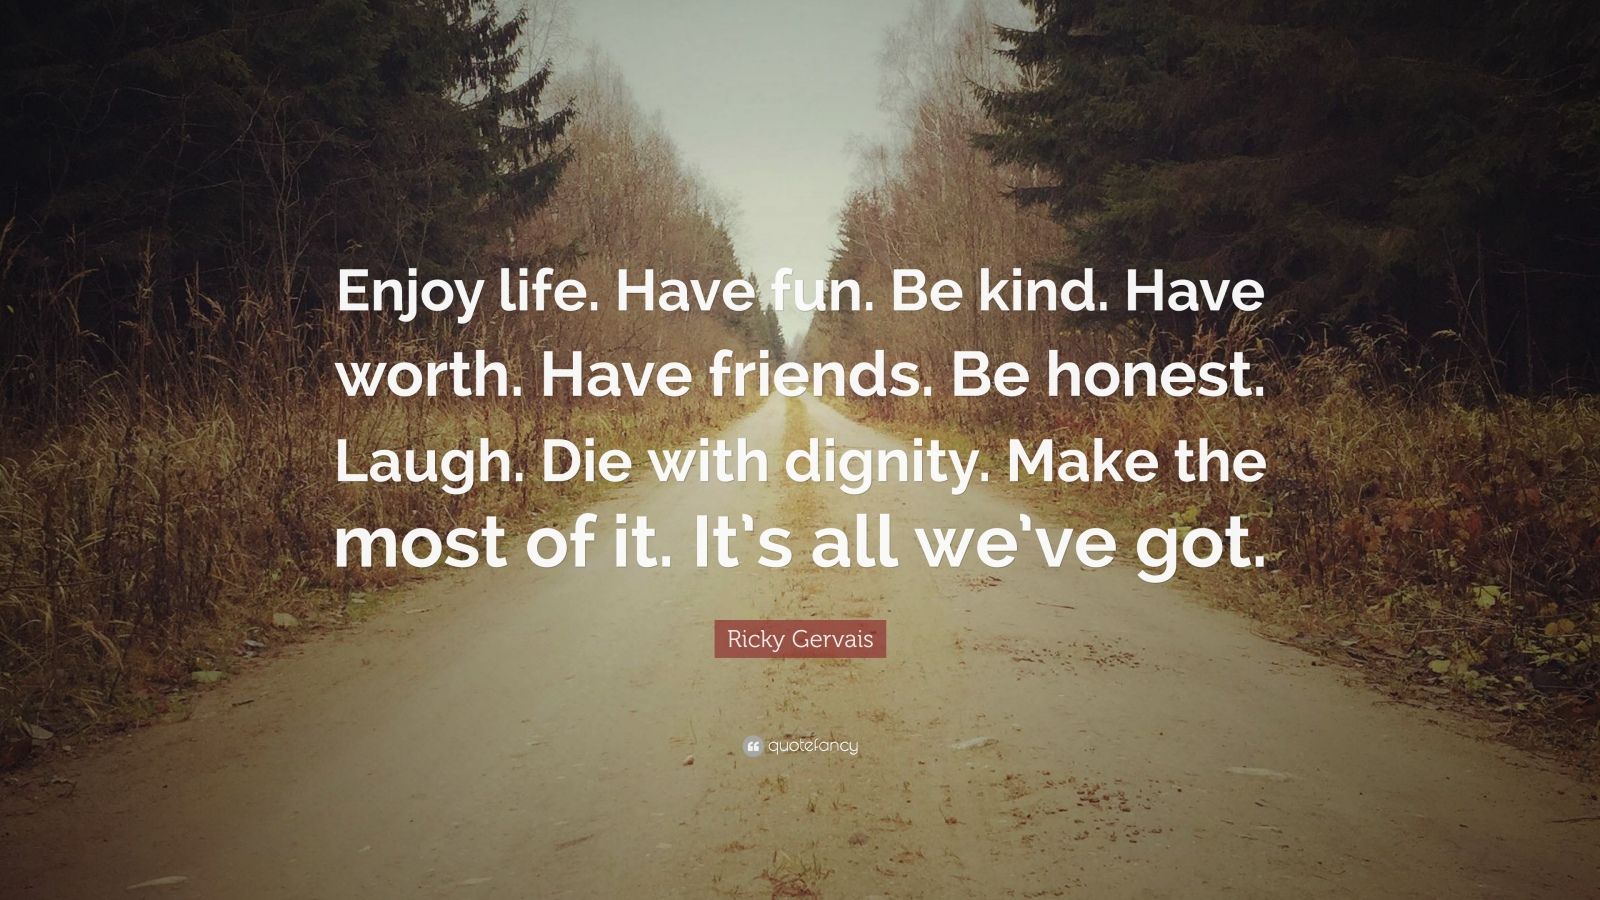 Ricky Gervais Quote: “Enjoy life. Have fun. Be kind. Have worth. Have